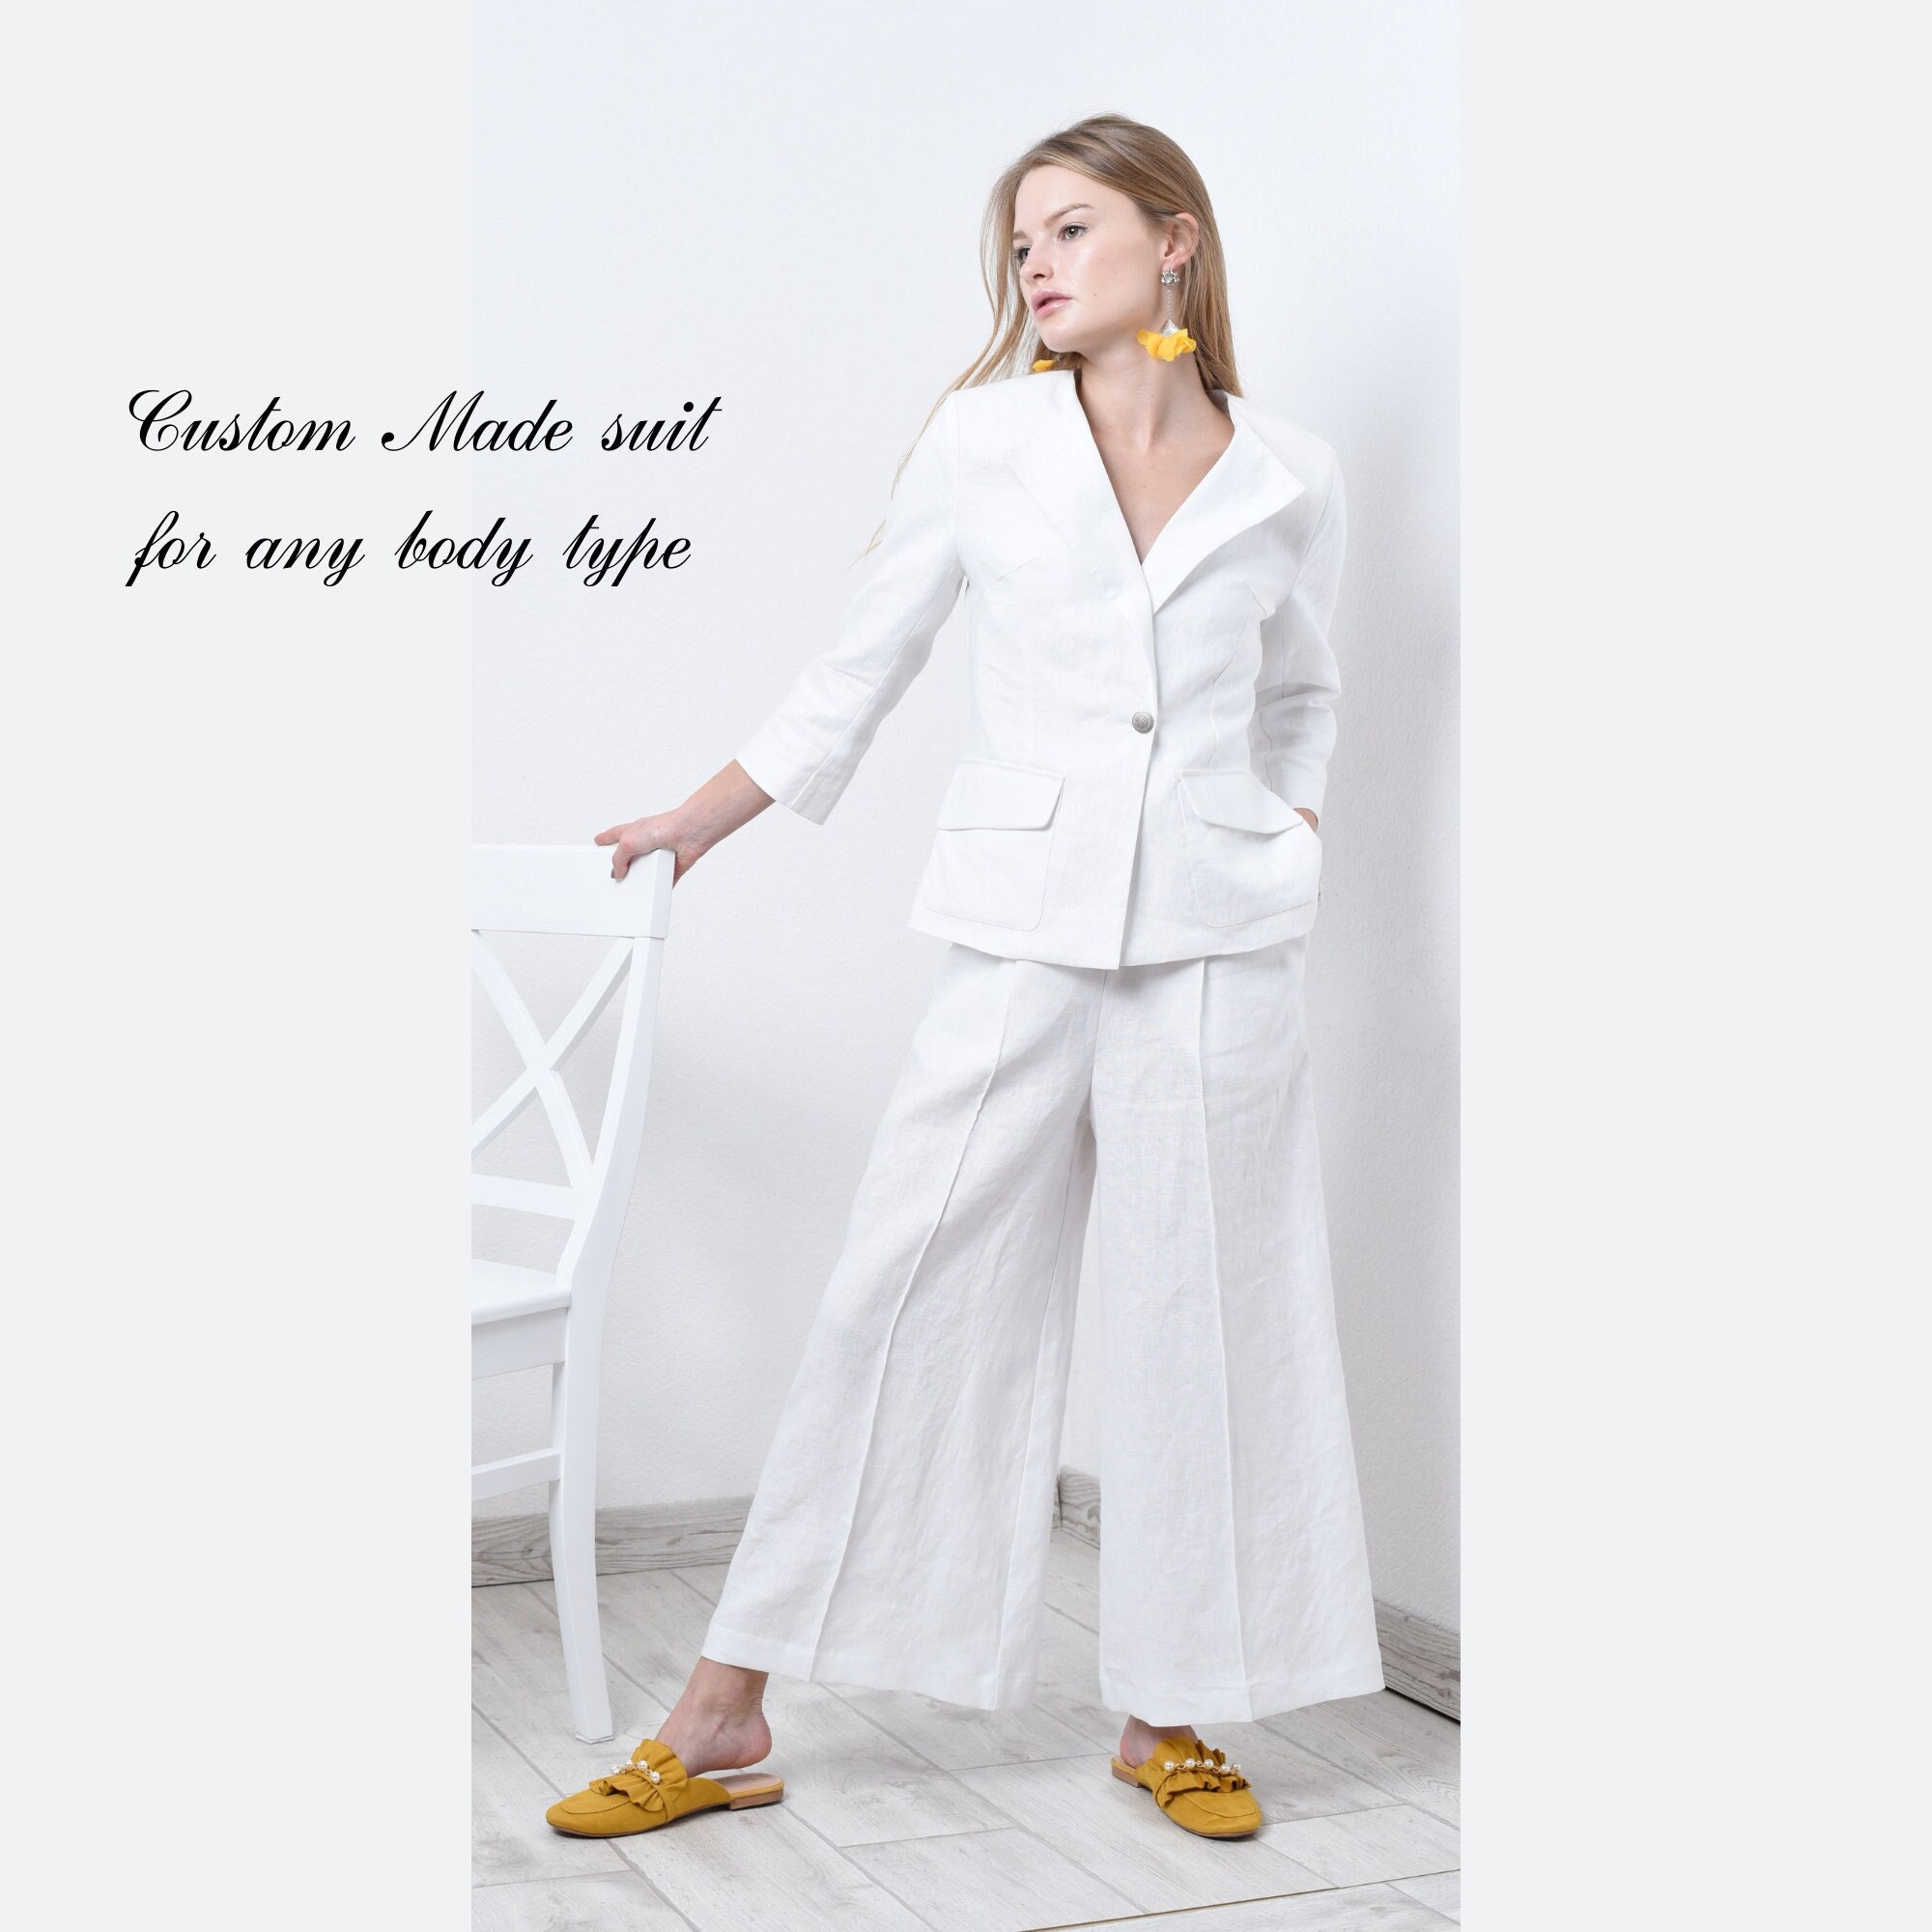 Pant Suits for Women Wedding Guest -  Canada